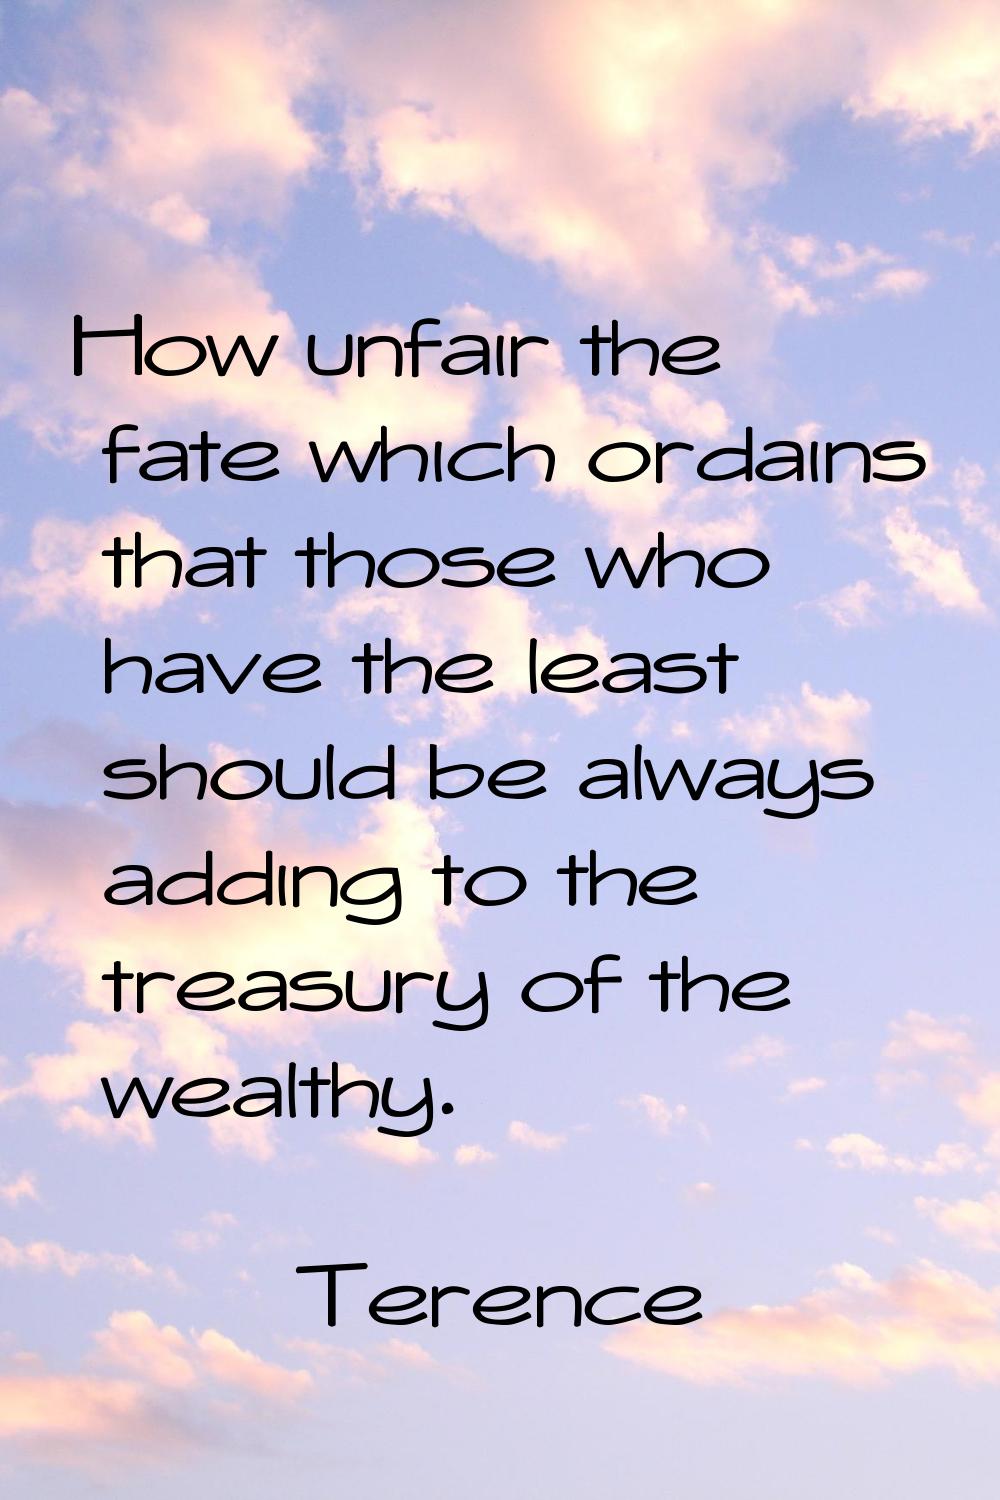 How unfair the fate which ordains that those who have the least should be always adding to the trea